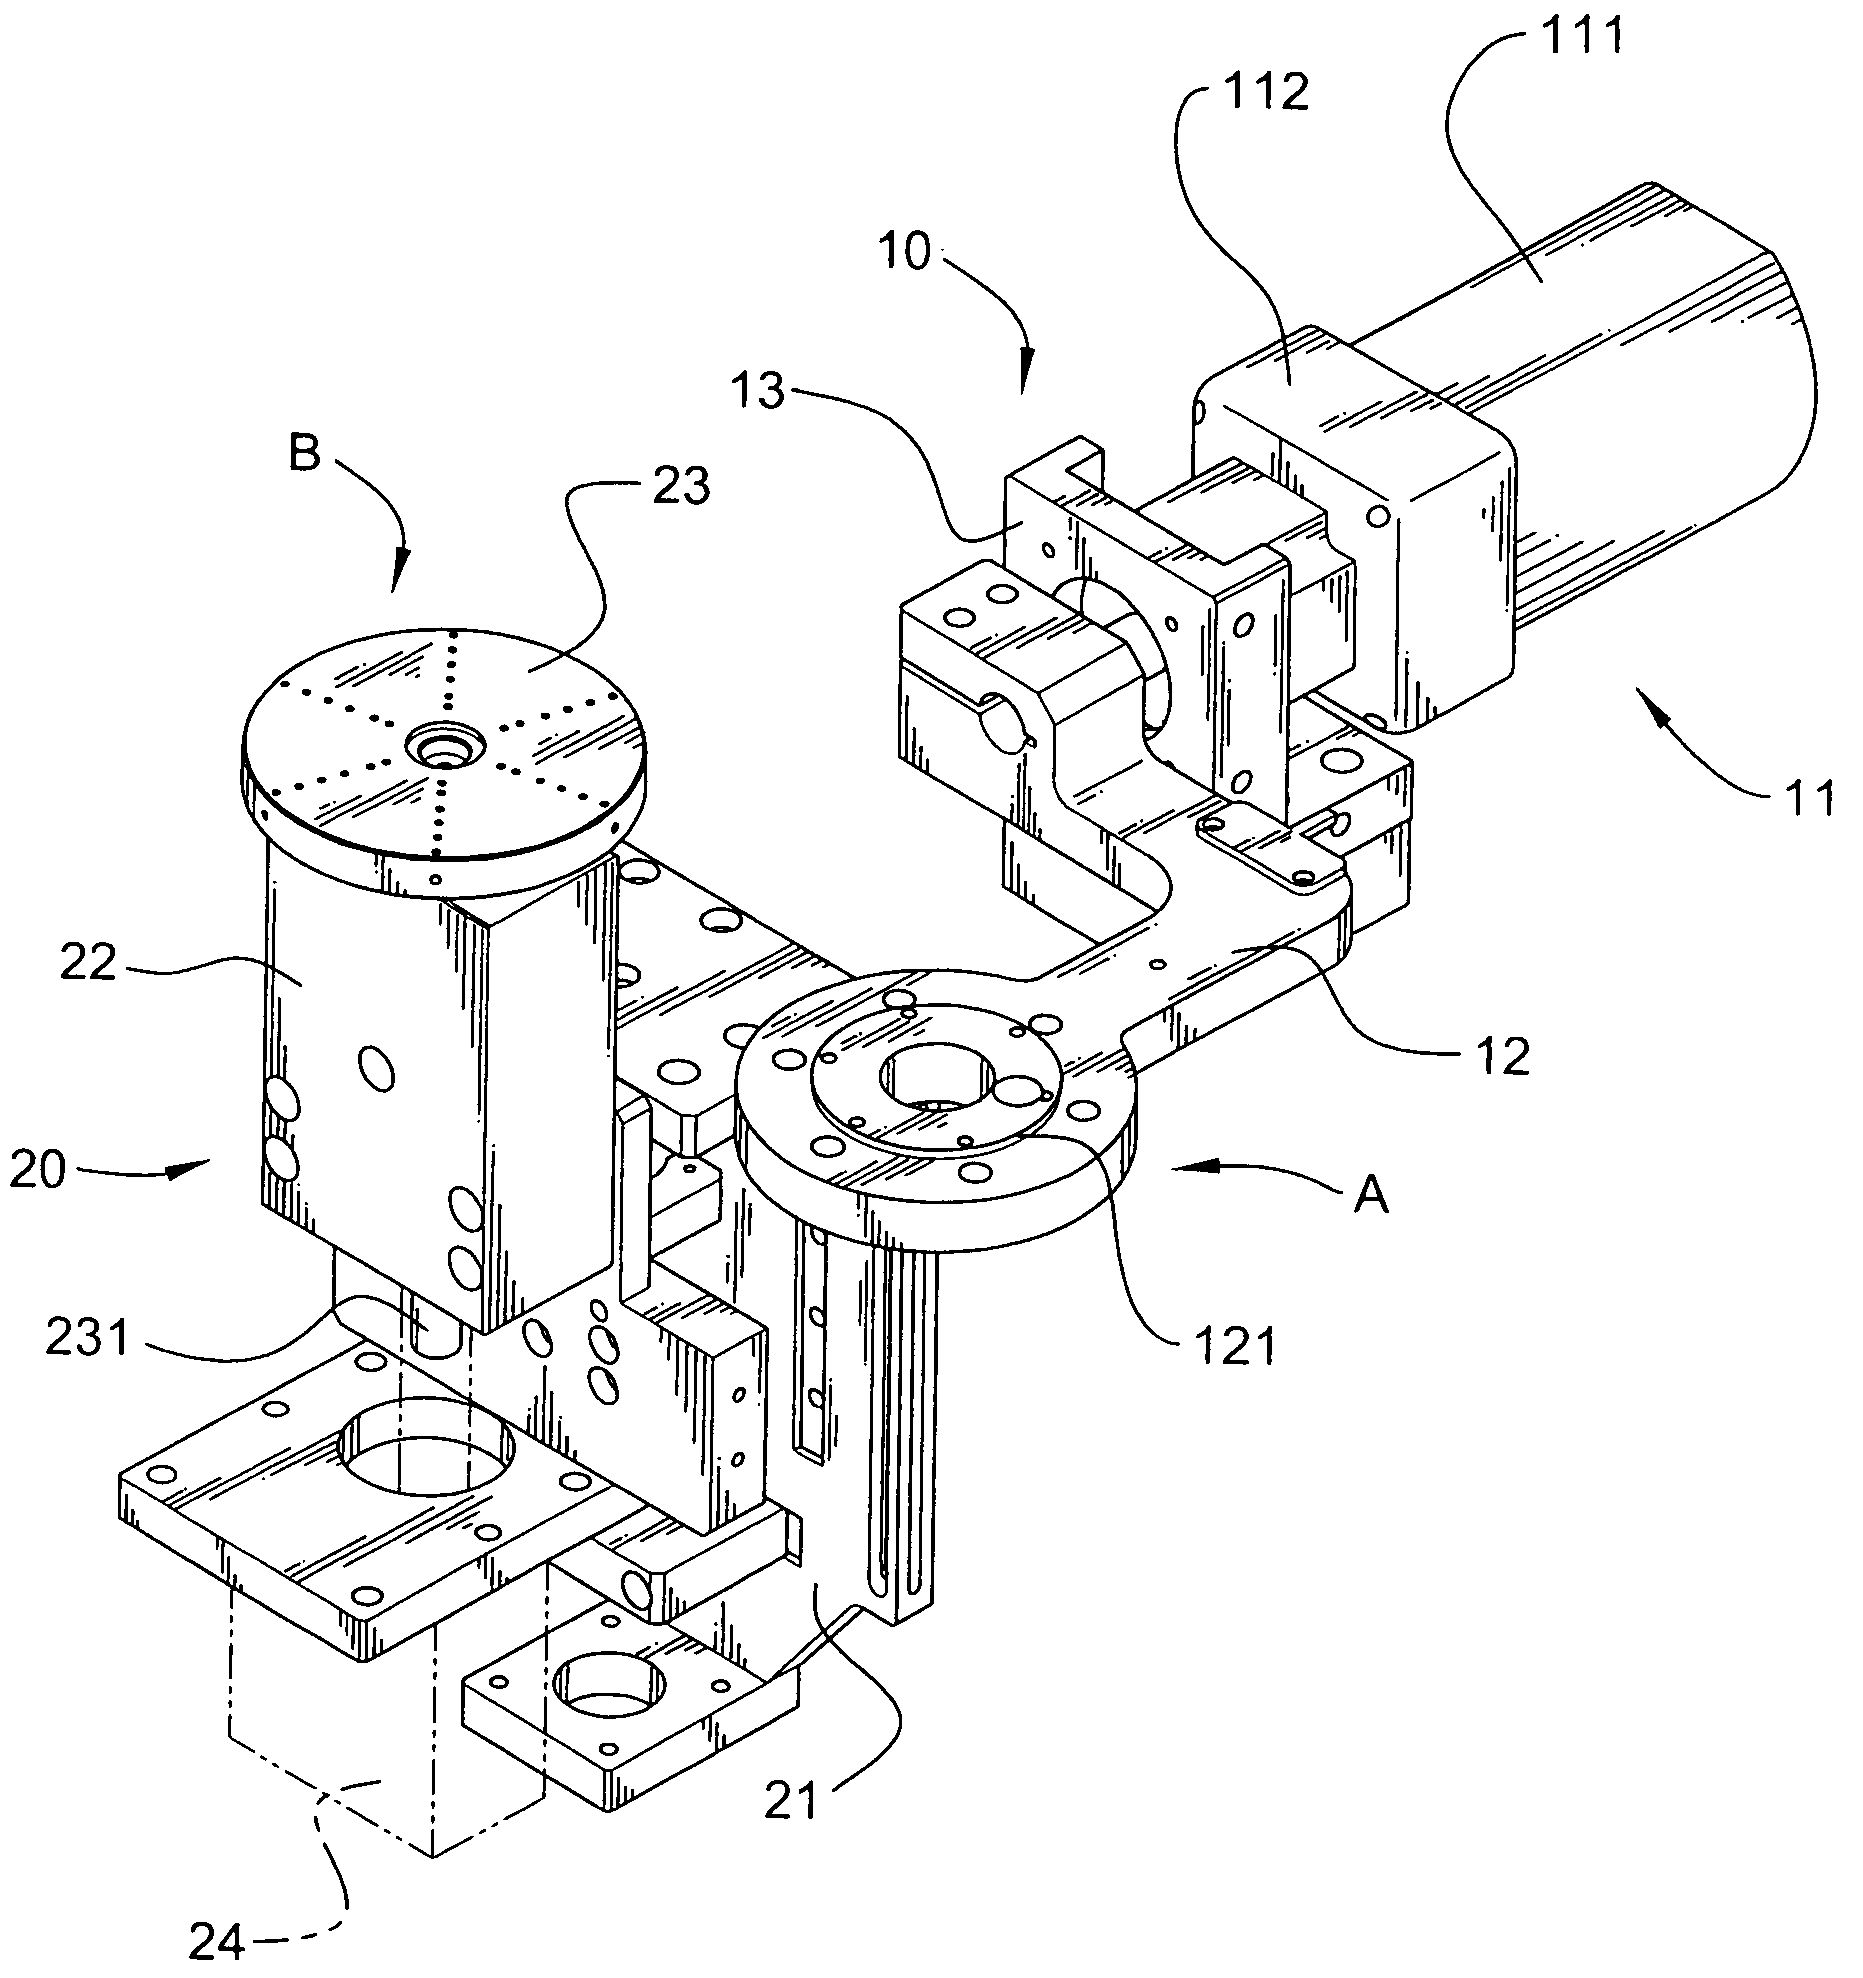 Integration device for compact disk